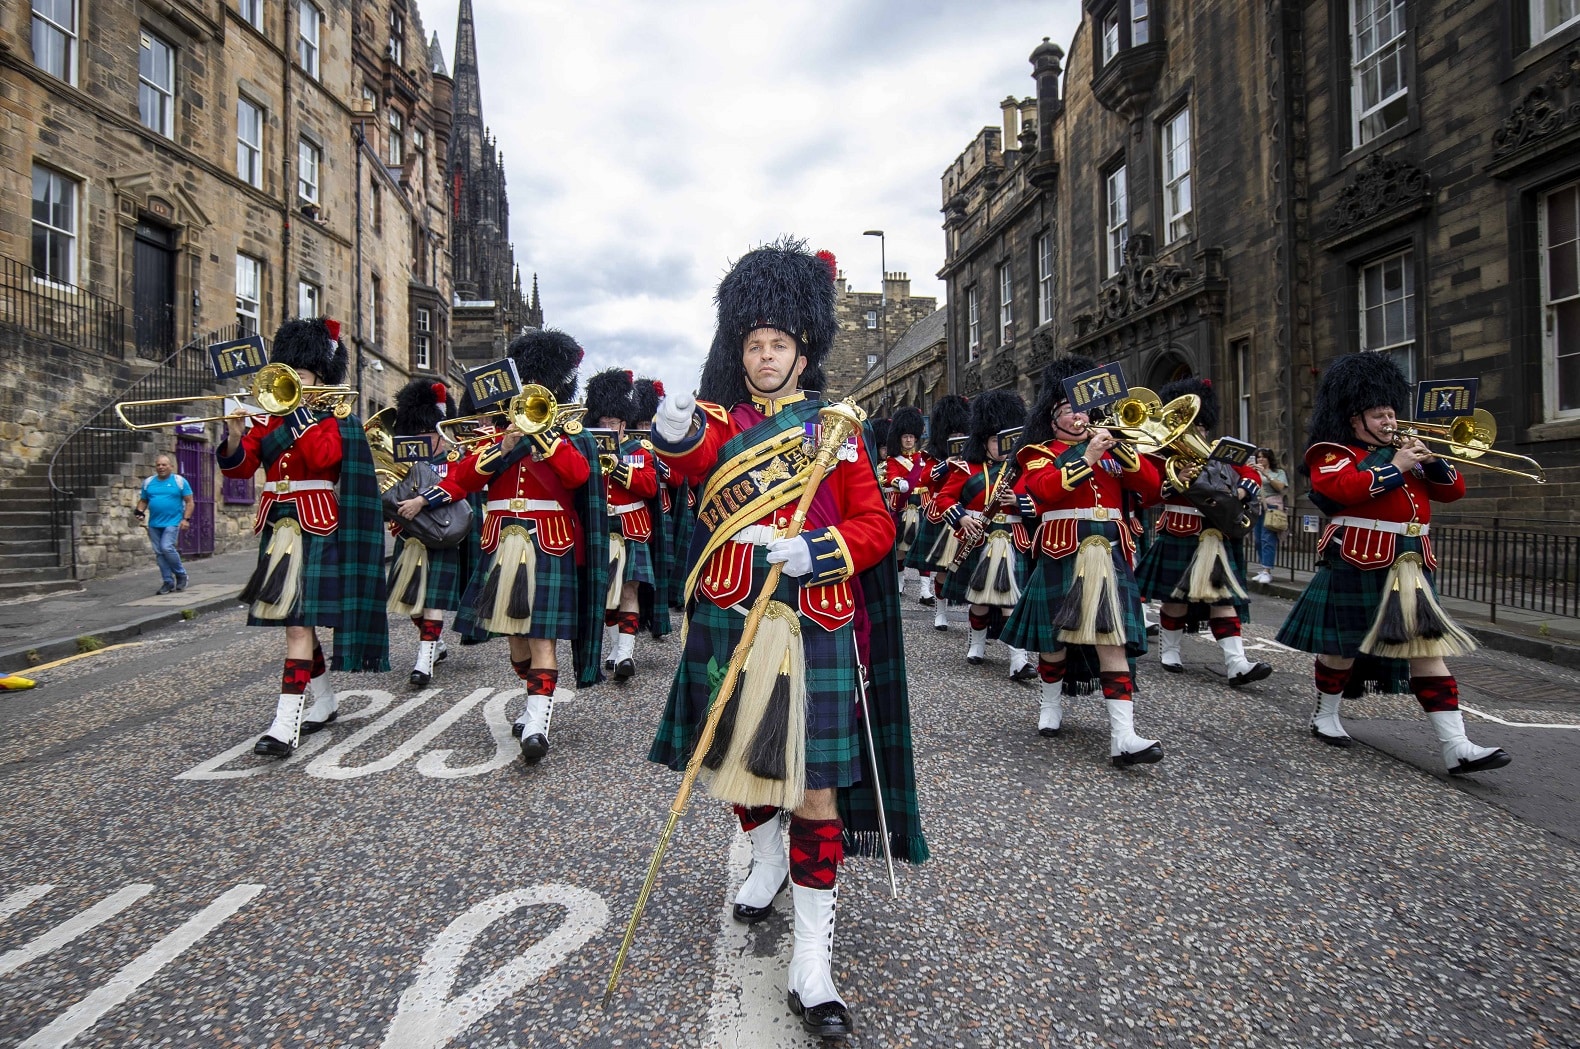 The Royal Regiment of Scotland band.